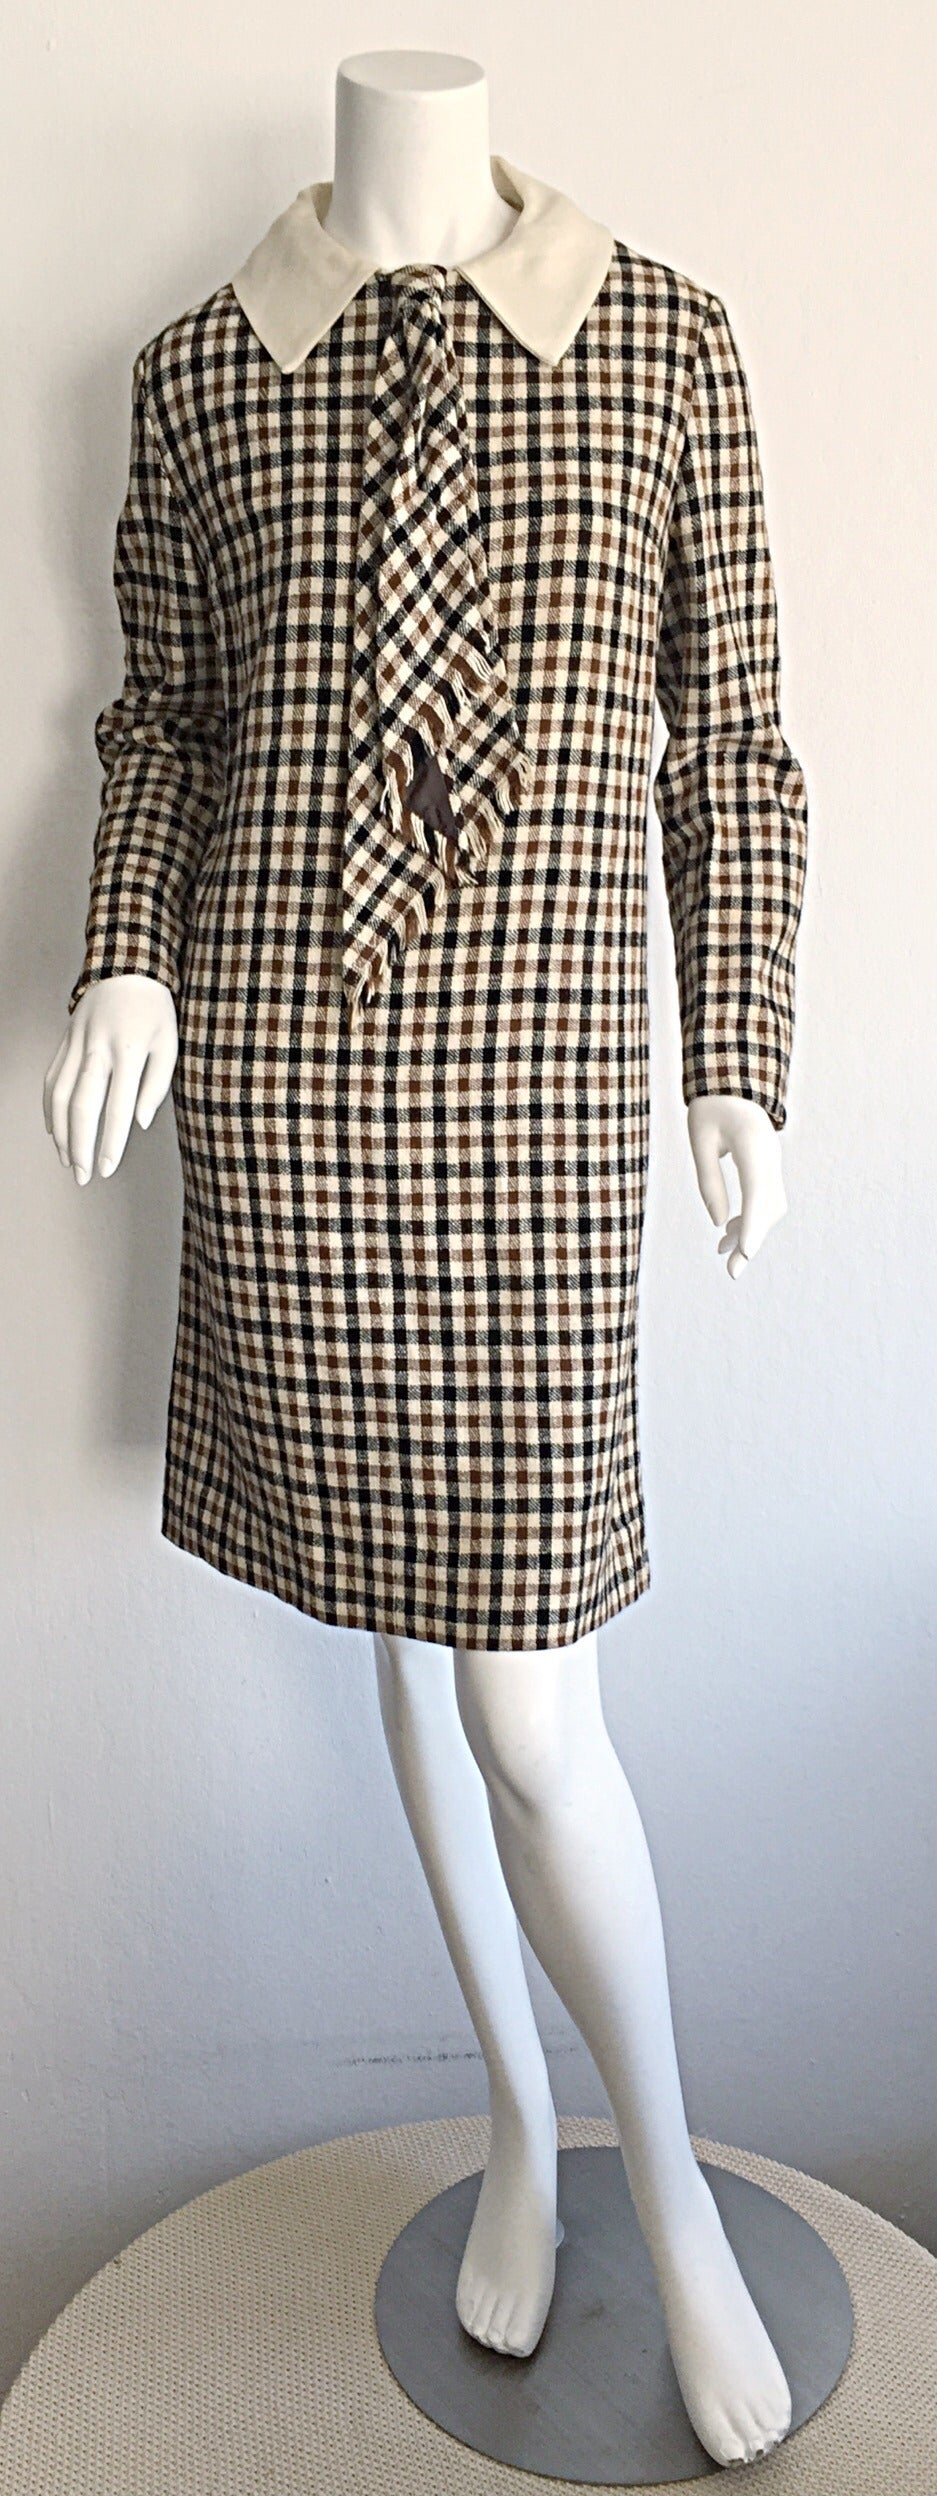 Chic 1960s I. Magnin plaid dress, with detachable collar! Collar attaches via hidden buttons inside the dress. Perfect shift shape. Looks great with, or without the collar, and with a belt. Goes day to night, with flats, sandals, wedges, babydolls,